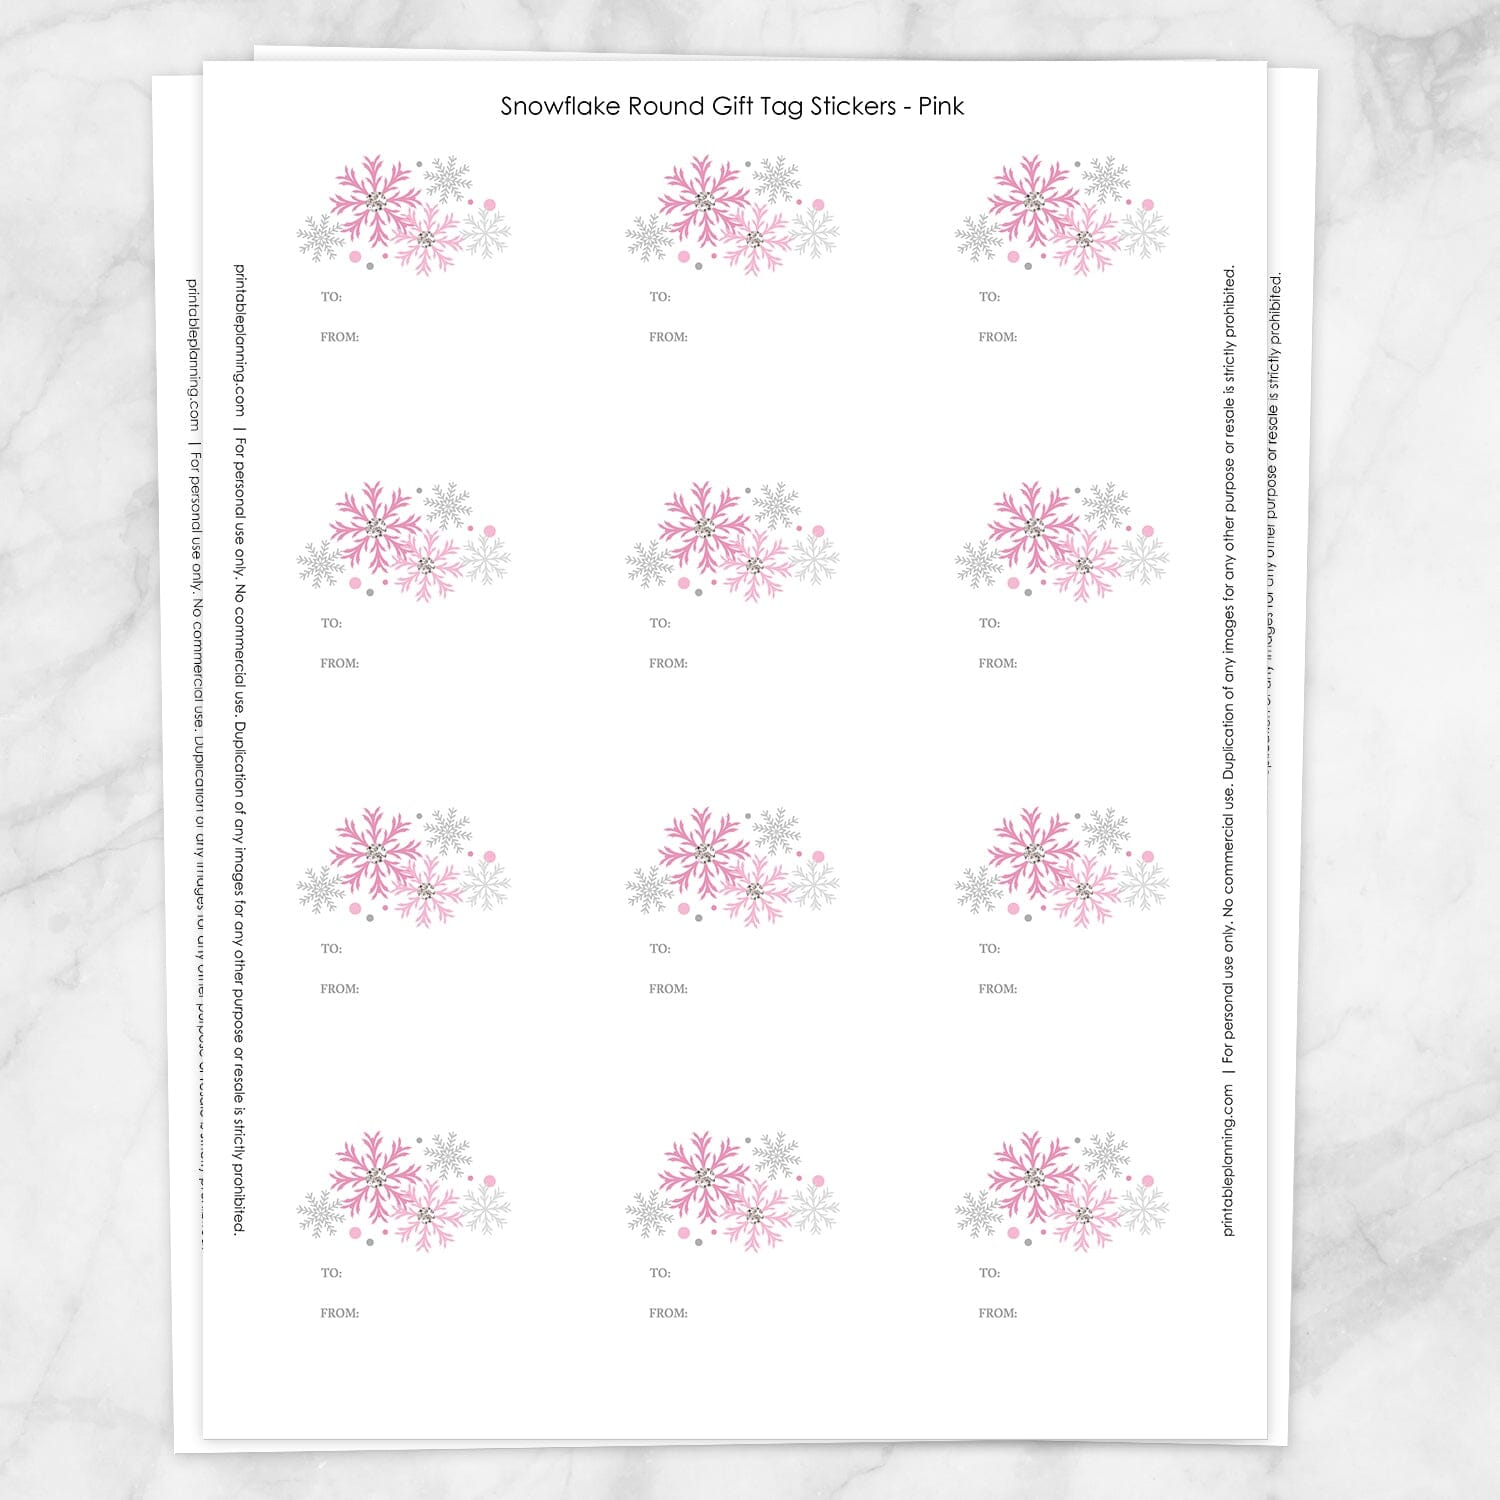 Printable Pink Snowflake Gift Tag Stickers at Printable Planning. Sheet of 12 stickers.